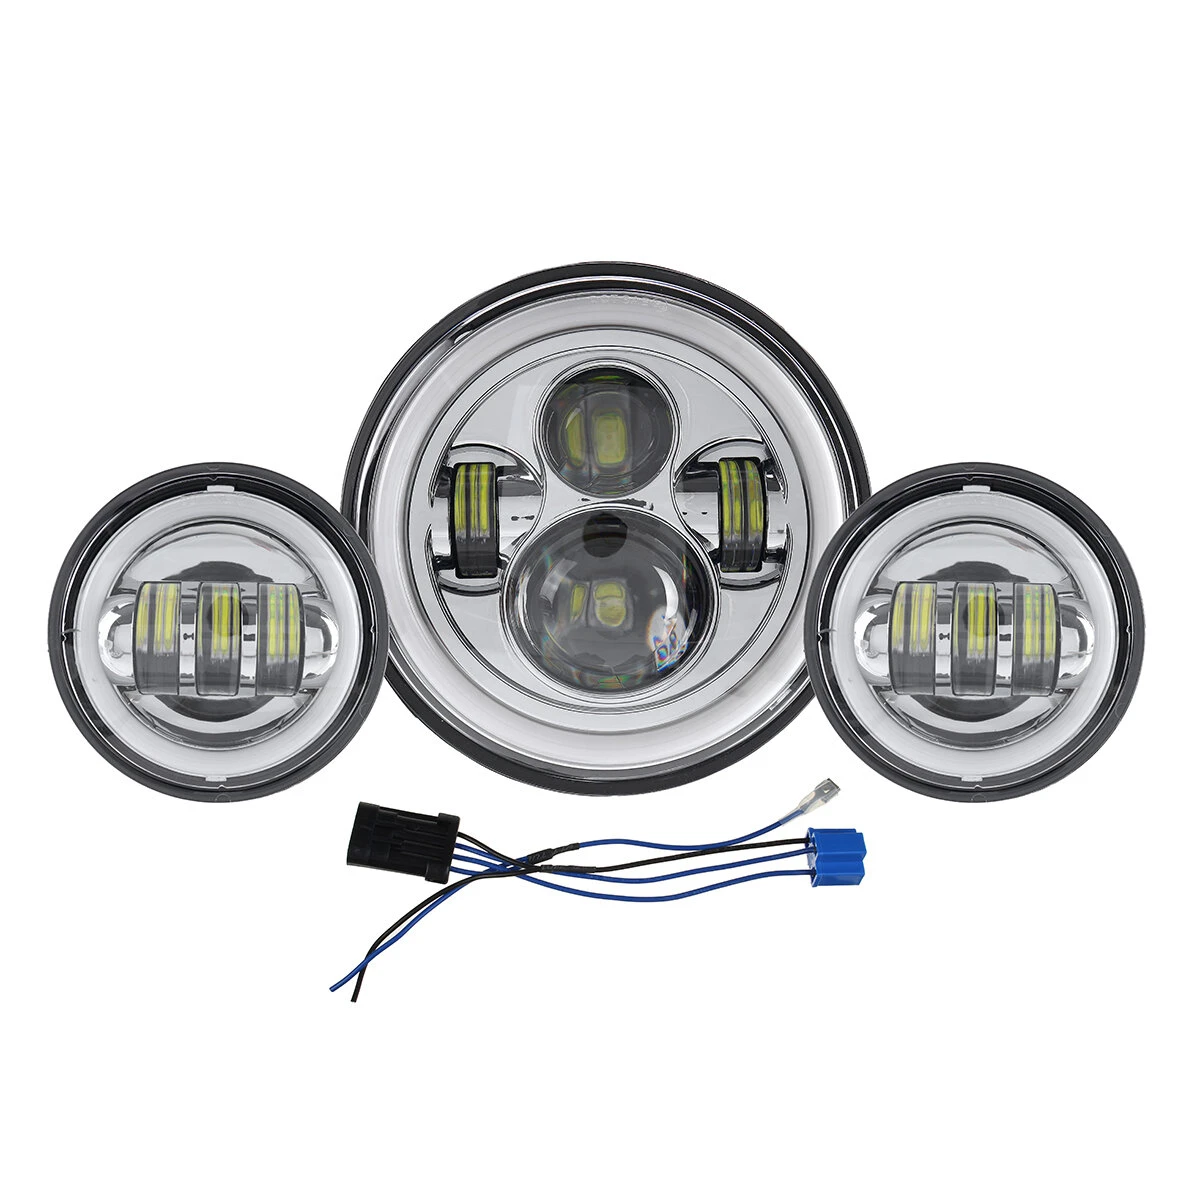 Motorcycle 7 LED Projector Headlight 4.5 Passing Auxiliary Light With Aperture White And Yellow Bicolor